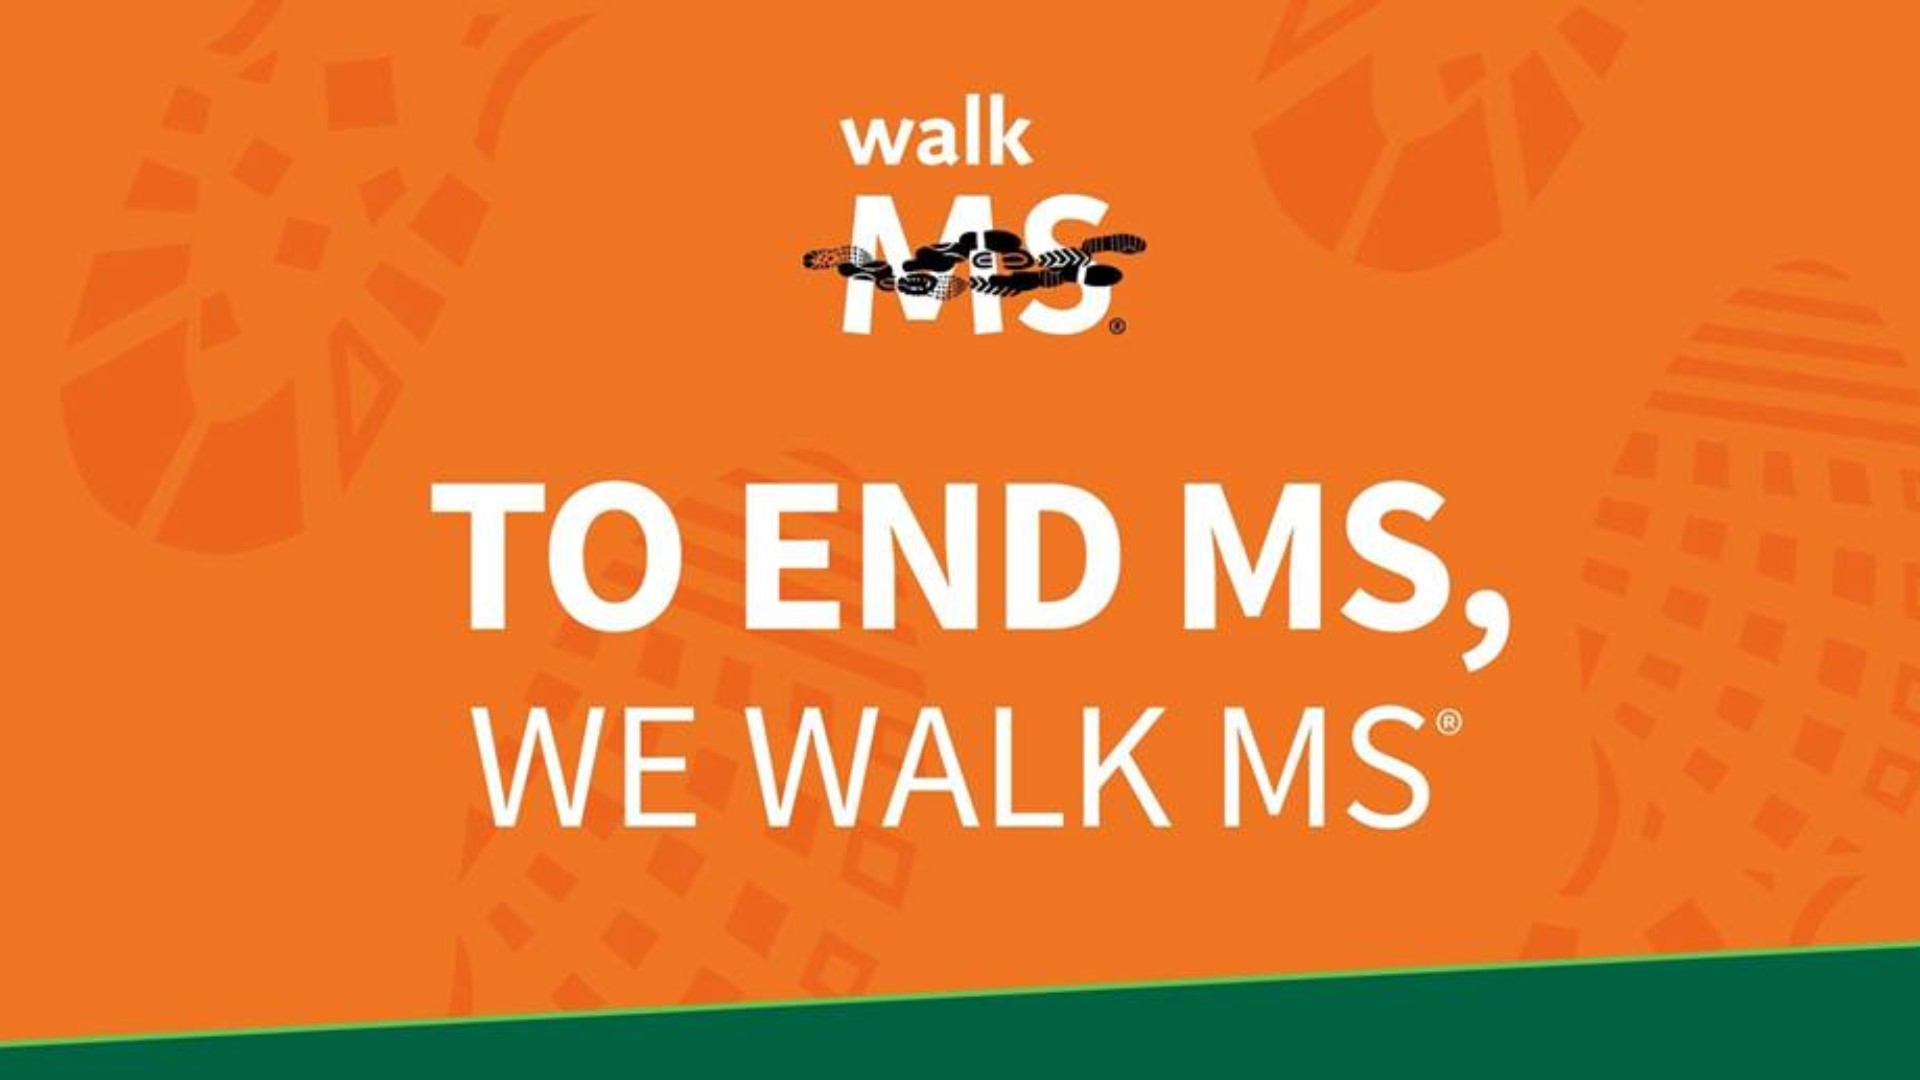 There one or three miles routes available at the City Park event which takes place on May 4. It raises money for the Multiple Sclerosis Society.